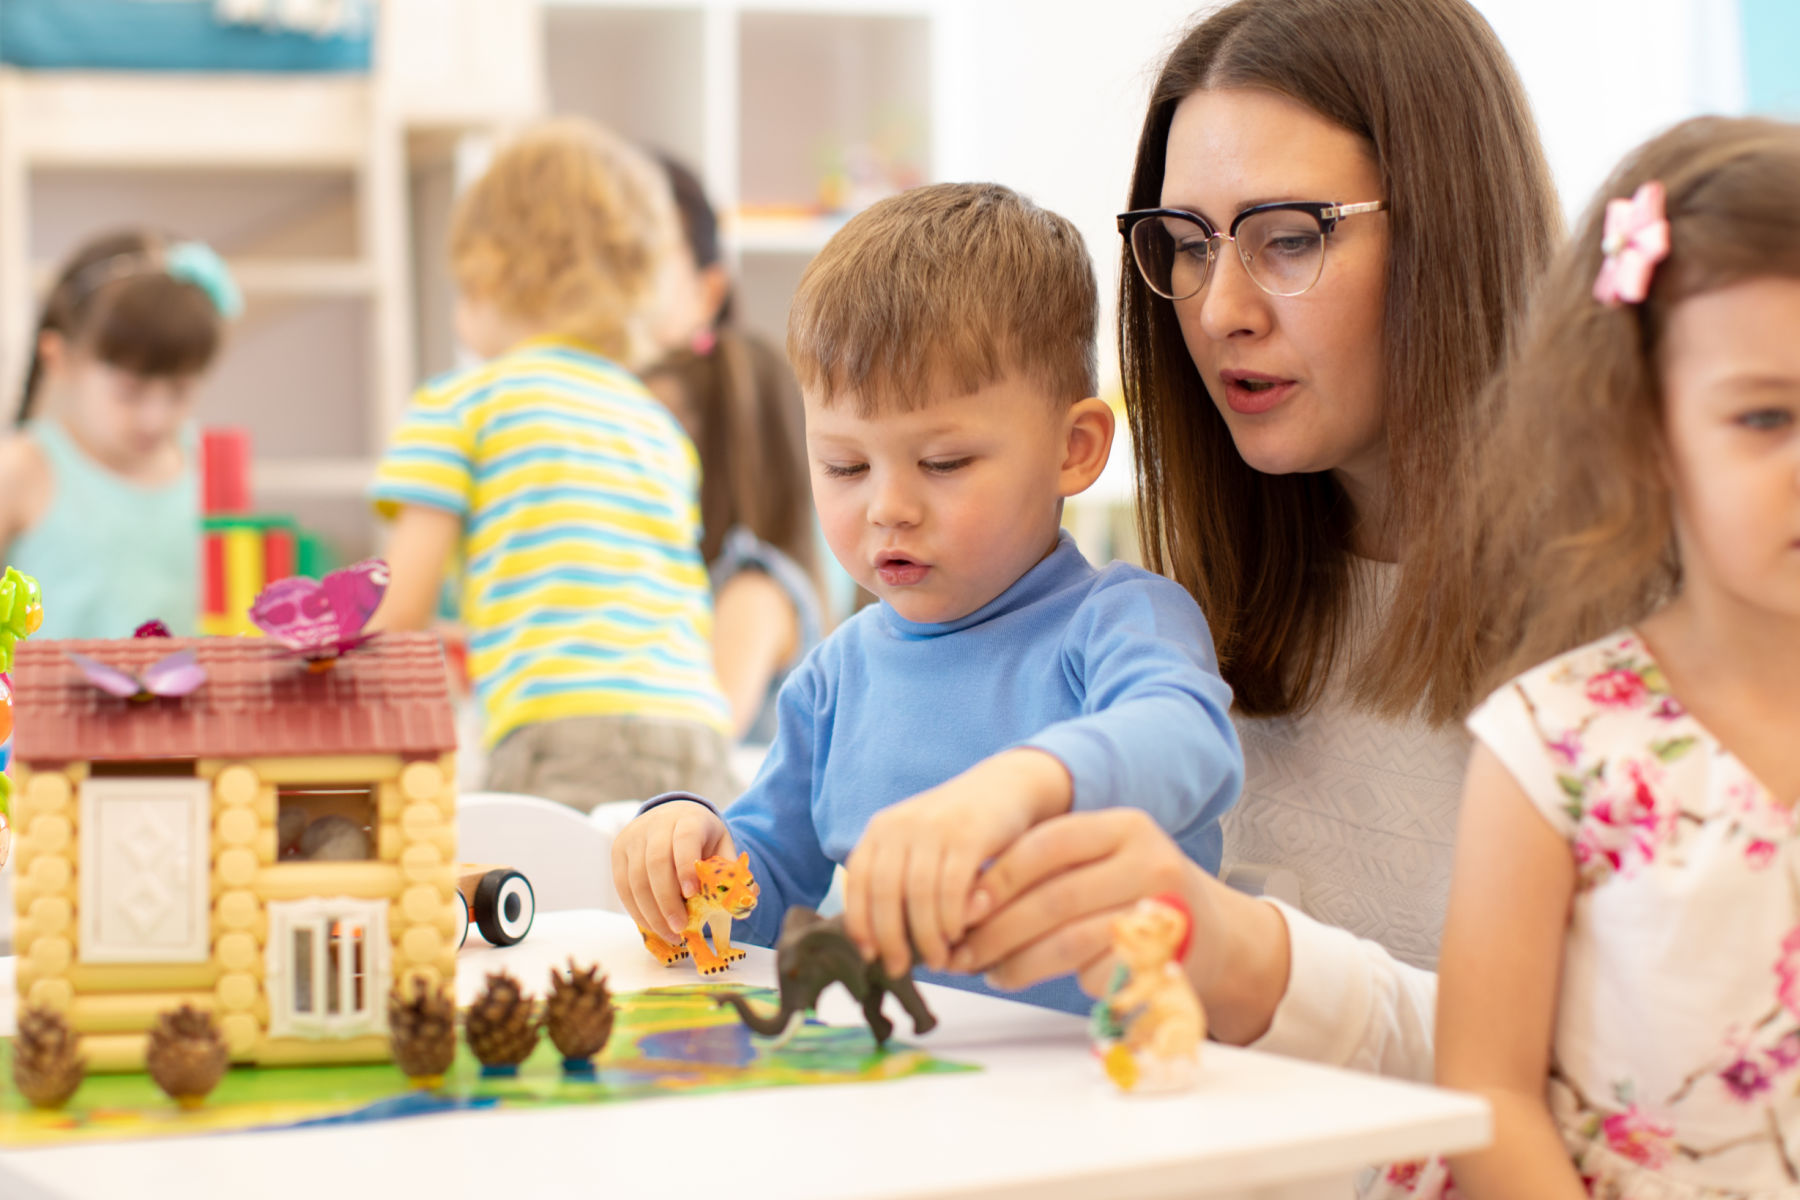 National Framework aims to minimise the impact of COVID on schools and the early learning sector